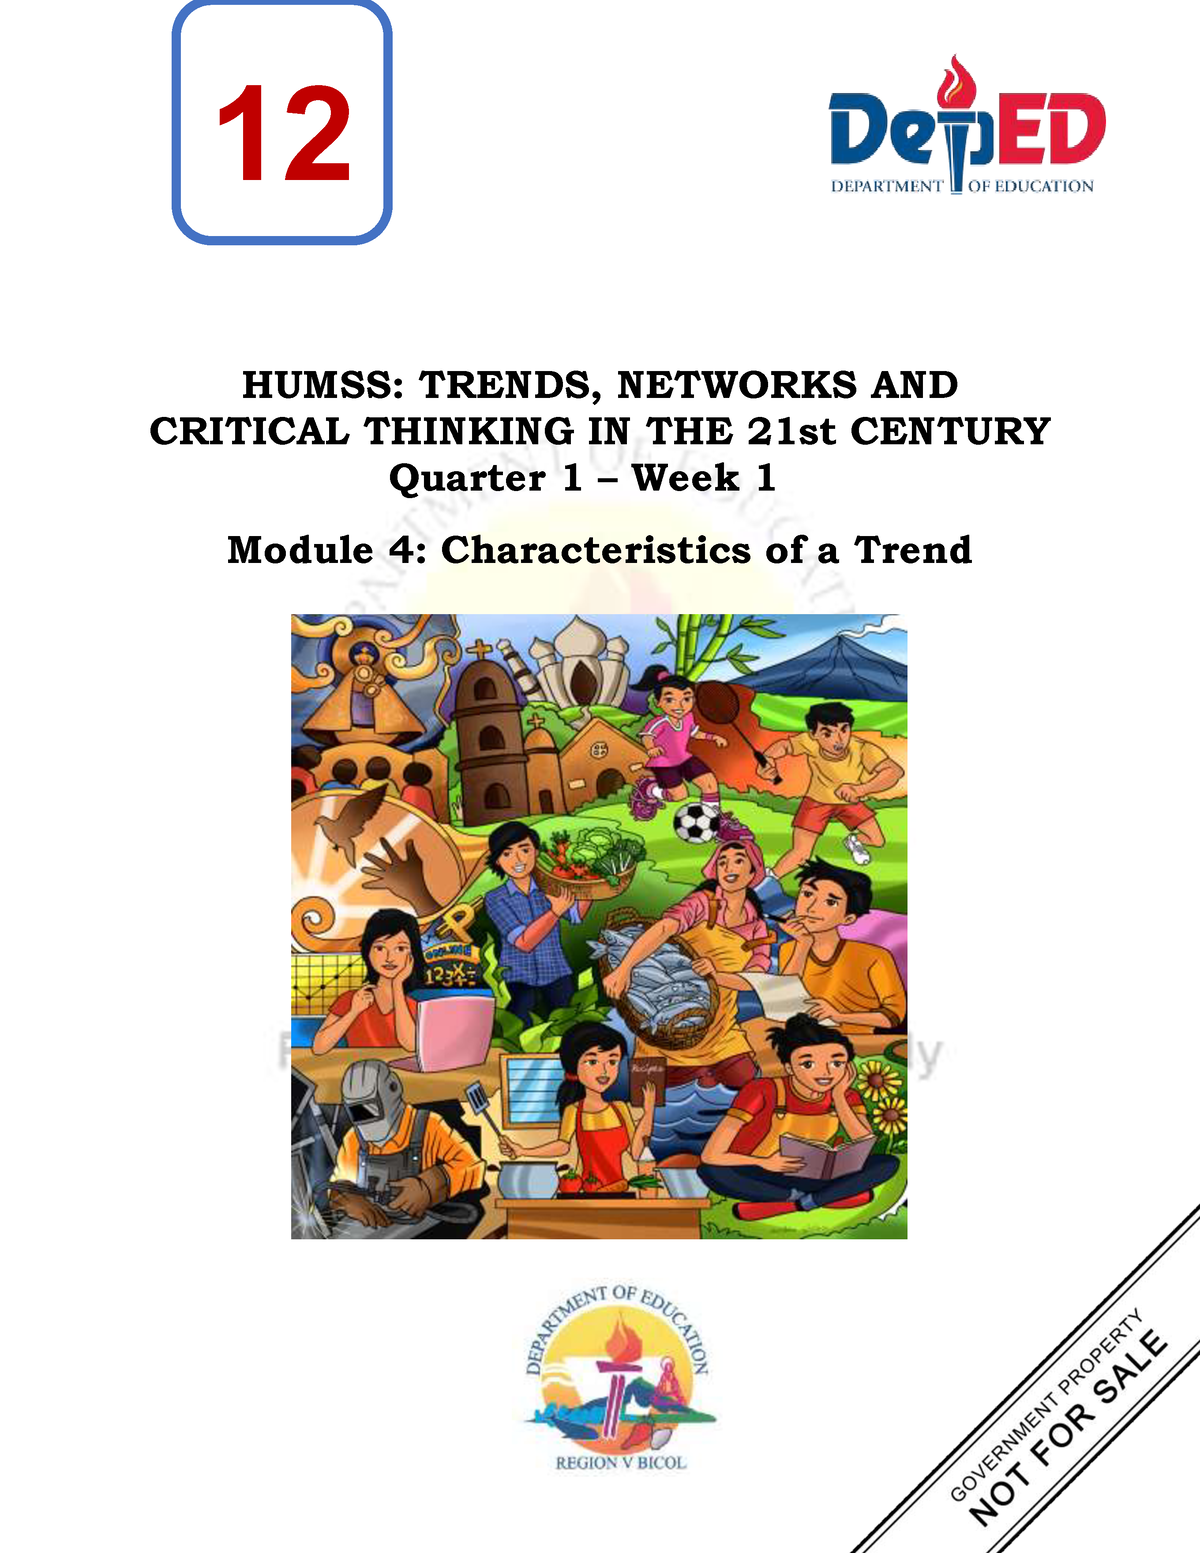 trends networks and critical thinking lesson plan